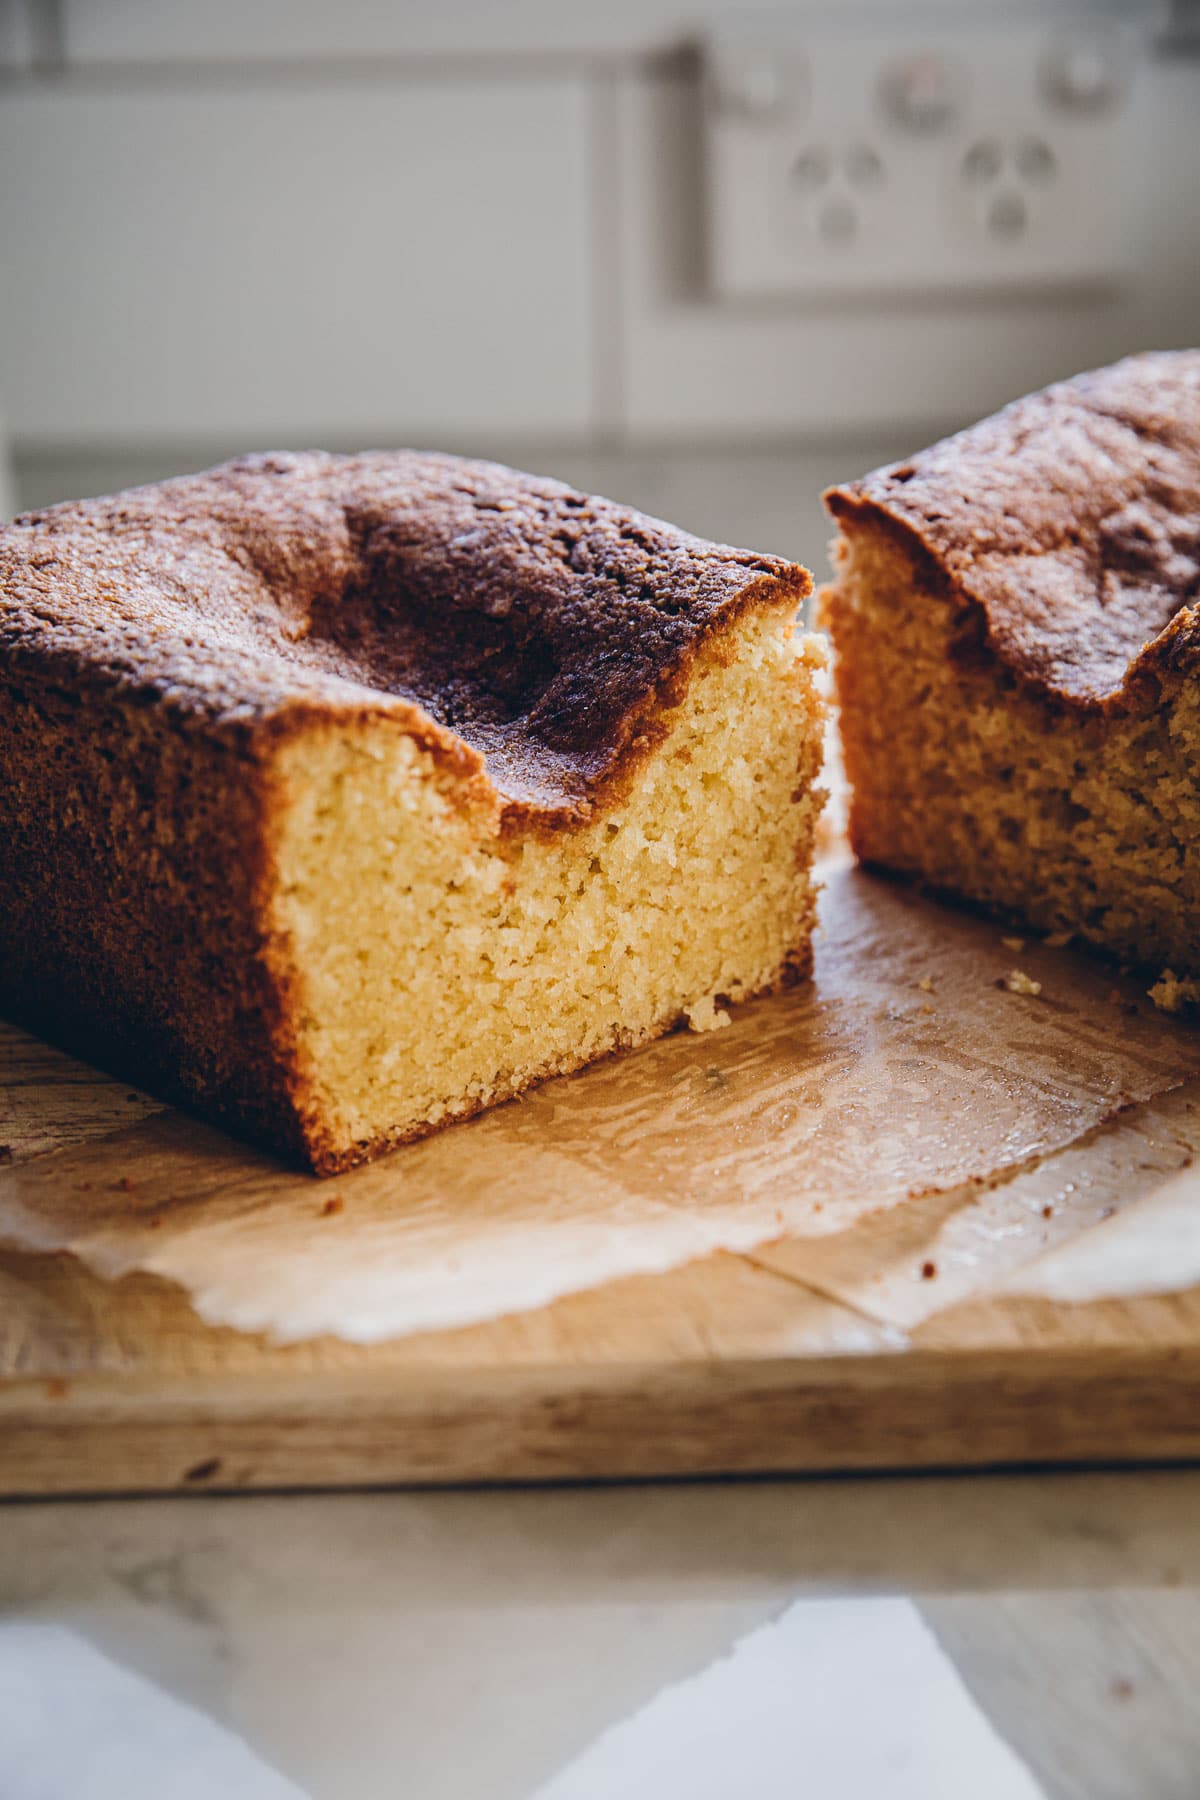 A traditional Lemon Madeira Cake sunk on top after baking perfectly.